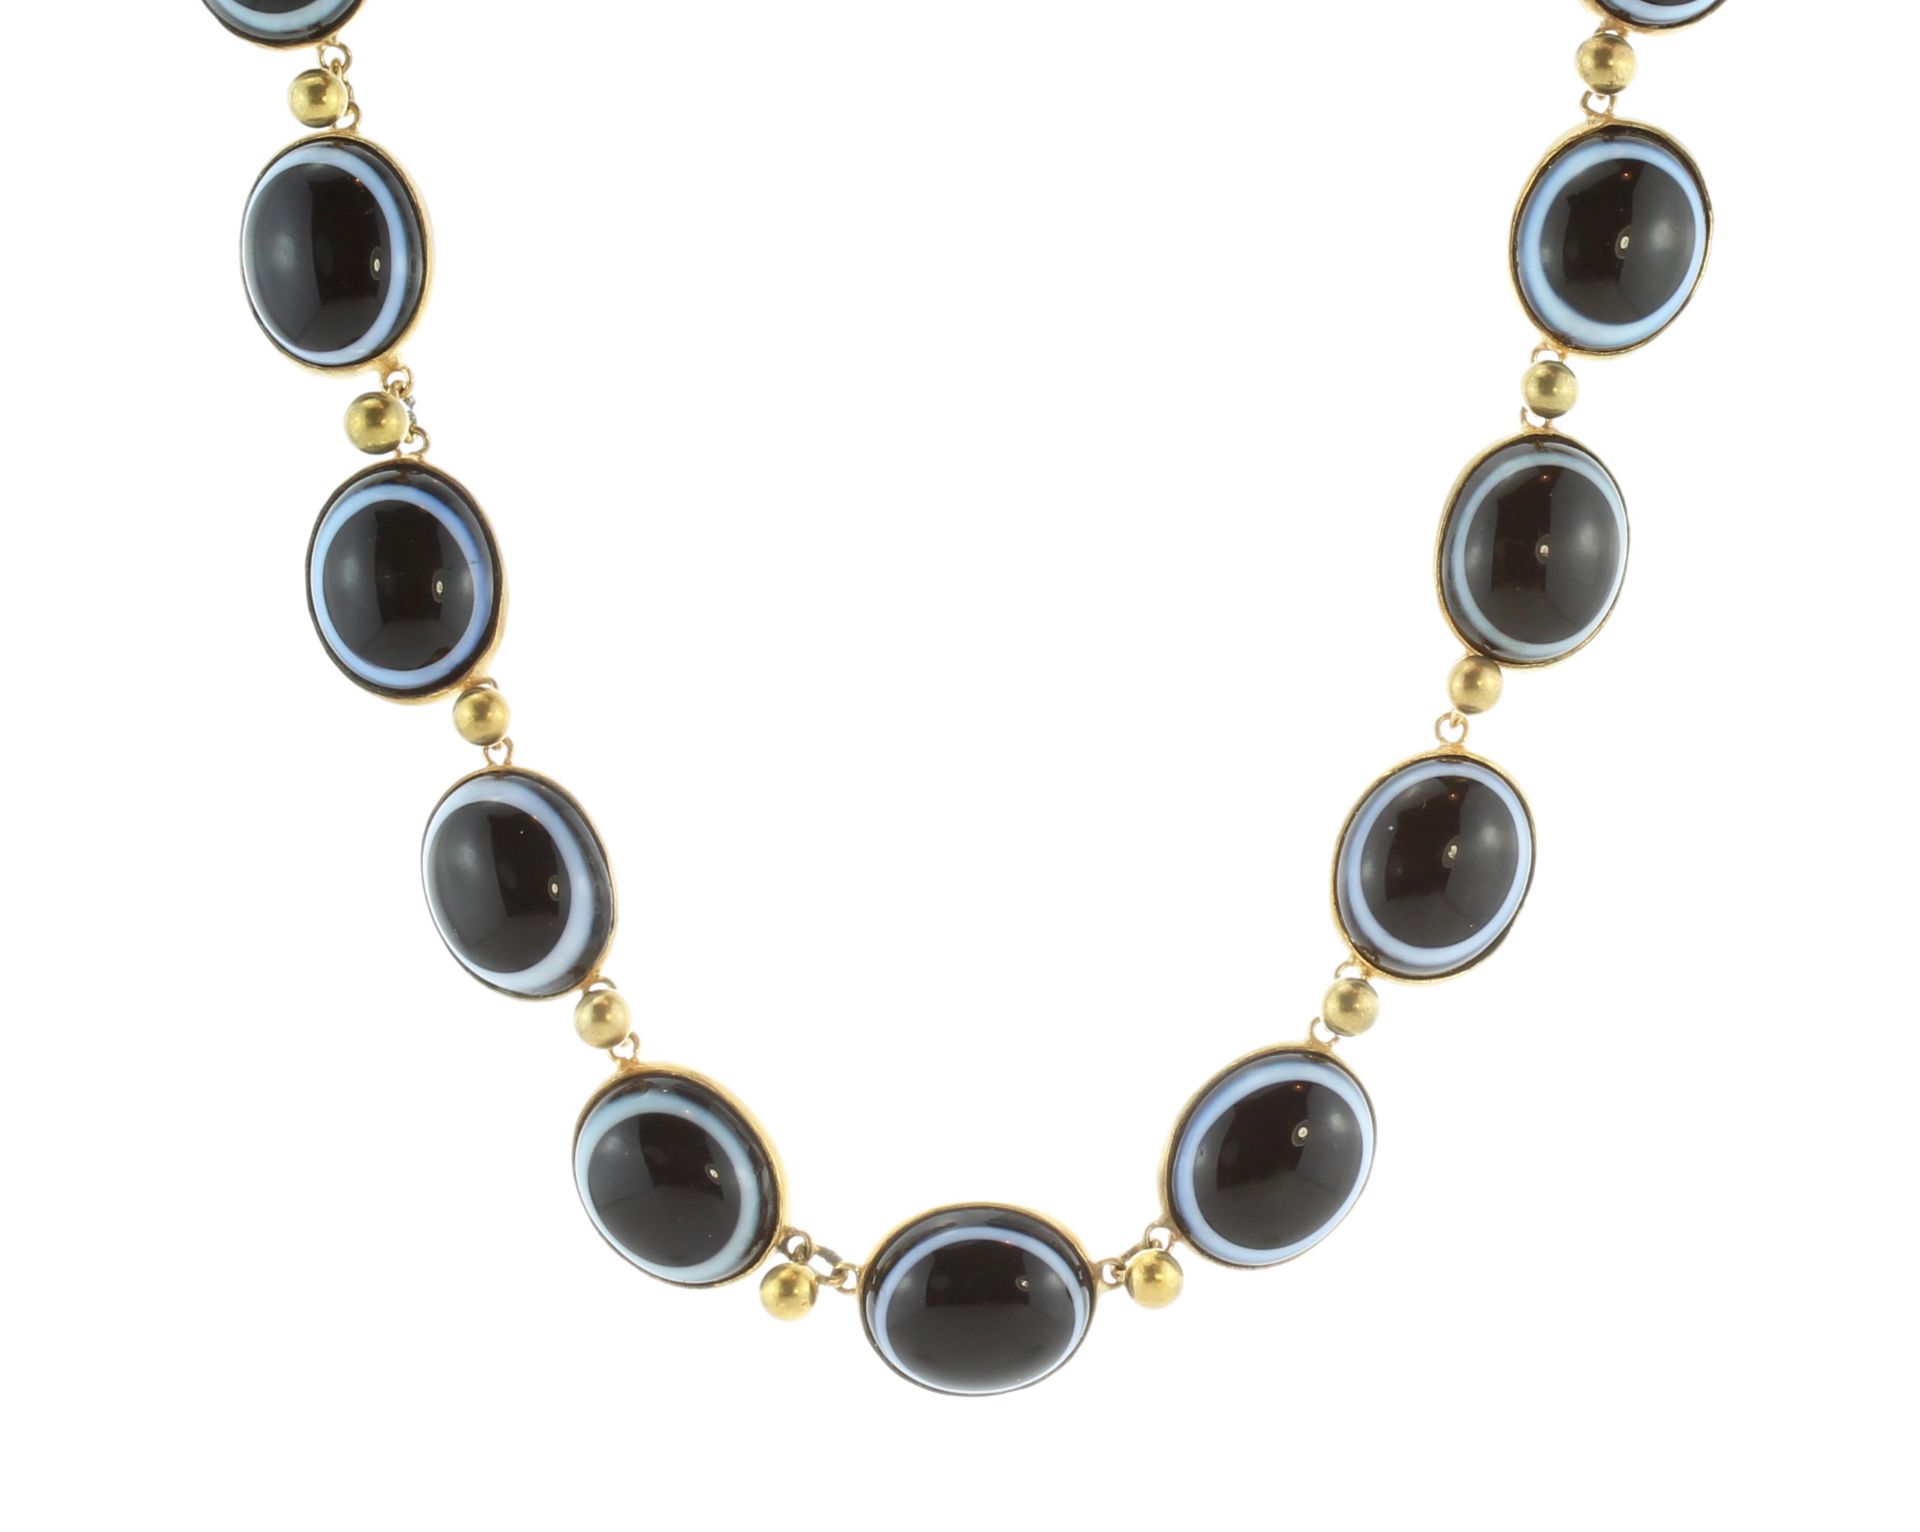 An antique 19th Century banded agate necklace in yellow metal designed as a single row of fifteen